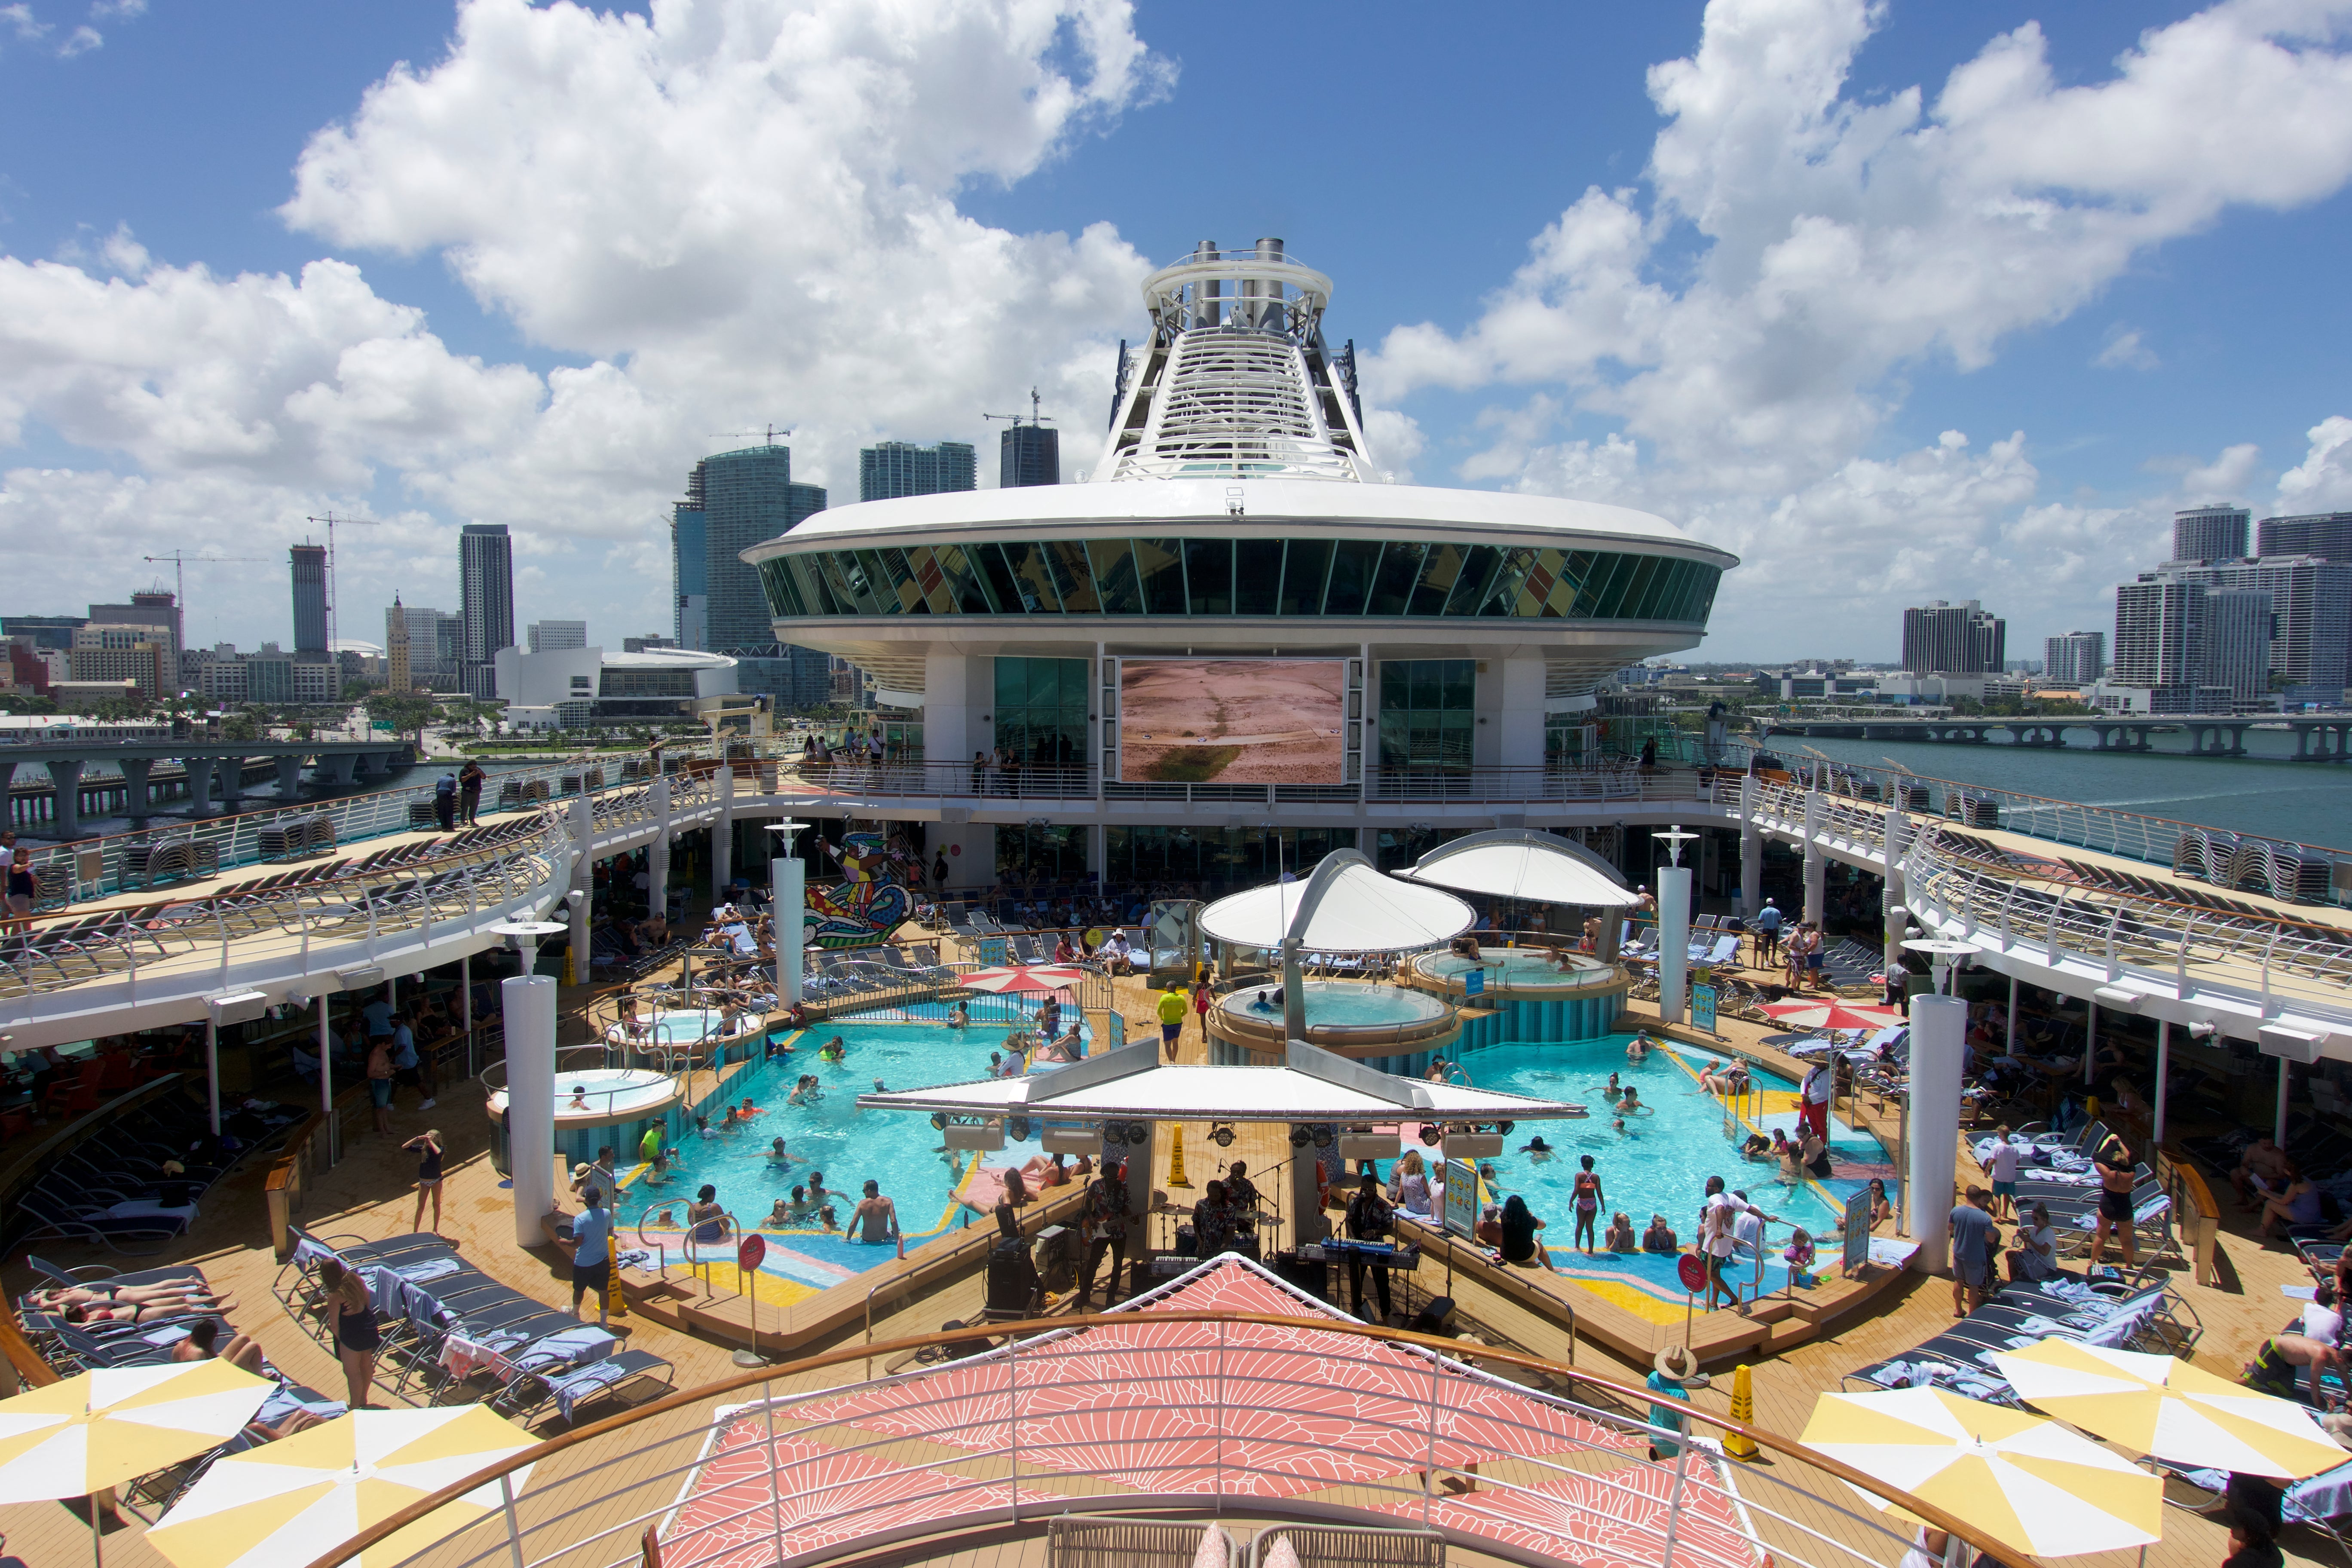 CRUISE SHIP REVIEW: Royal Caribbean's Mariner of the Seas - The Winglet